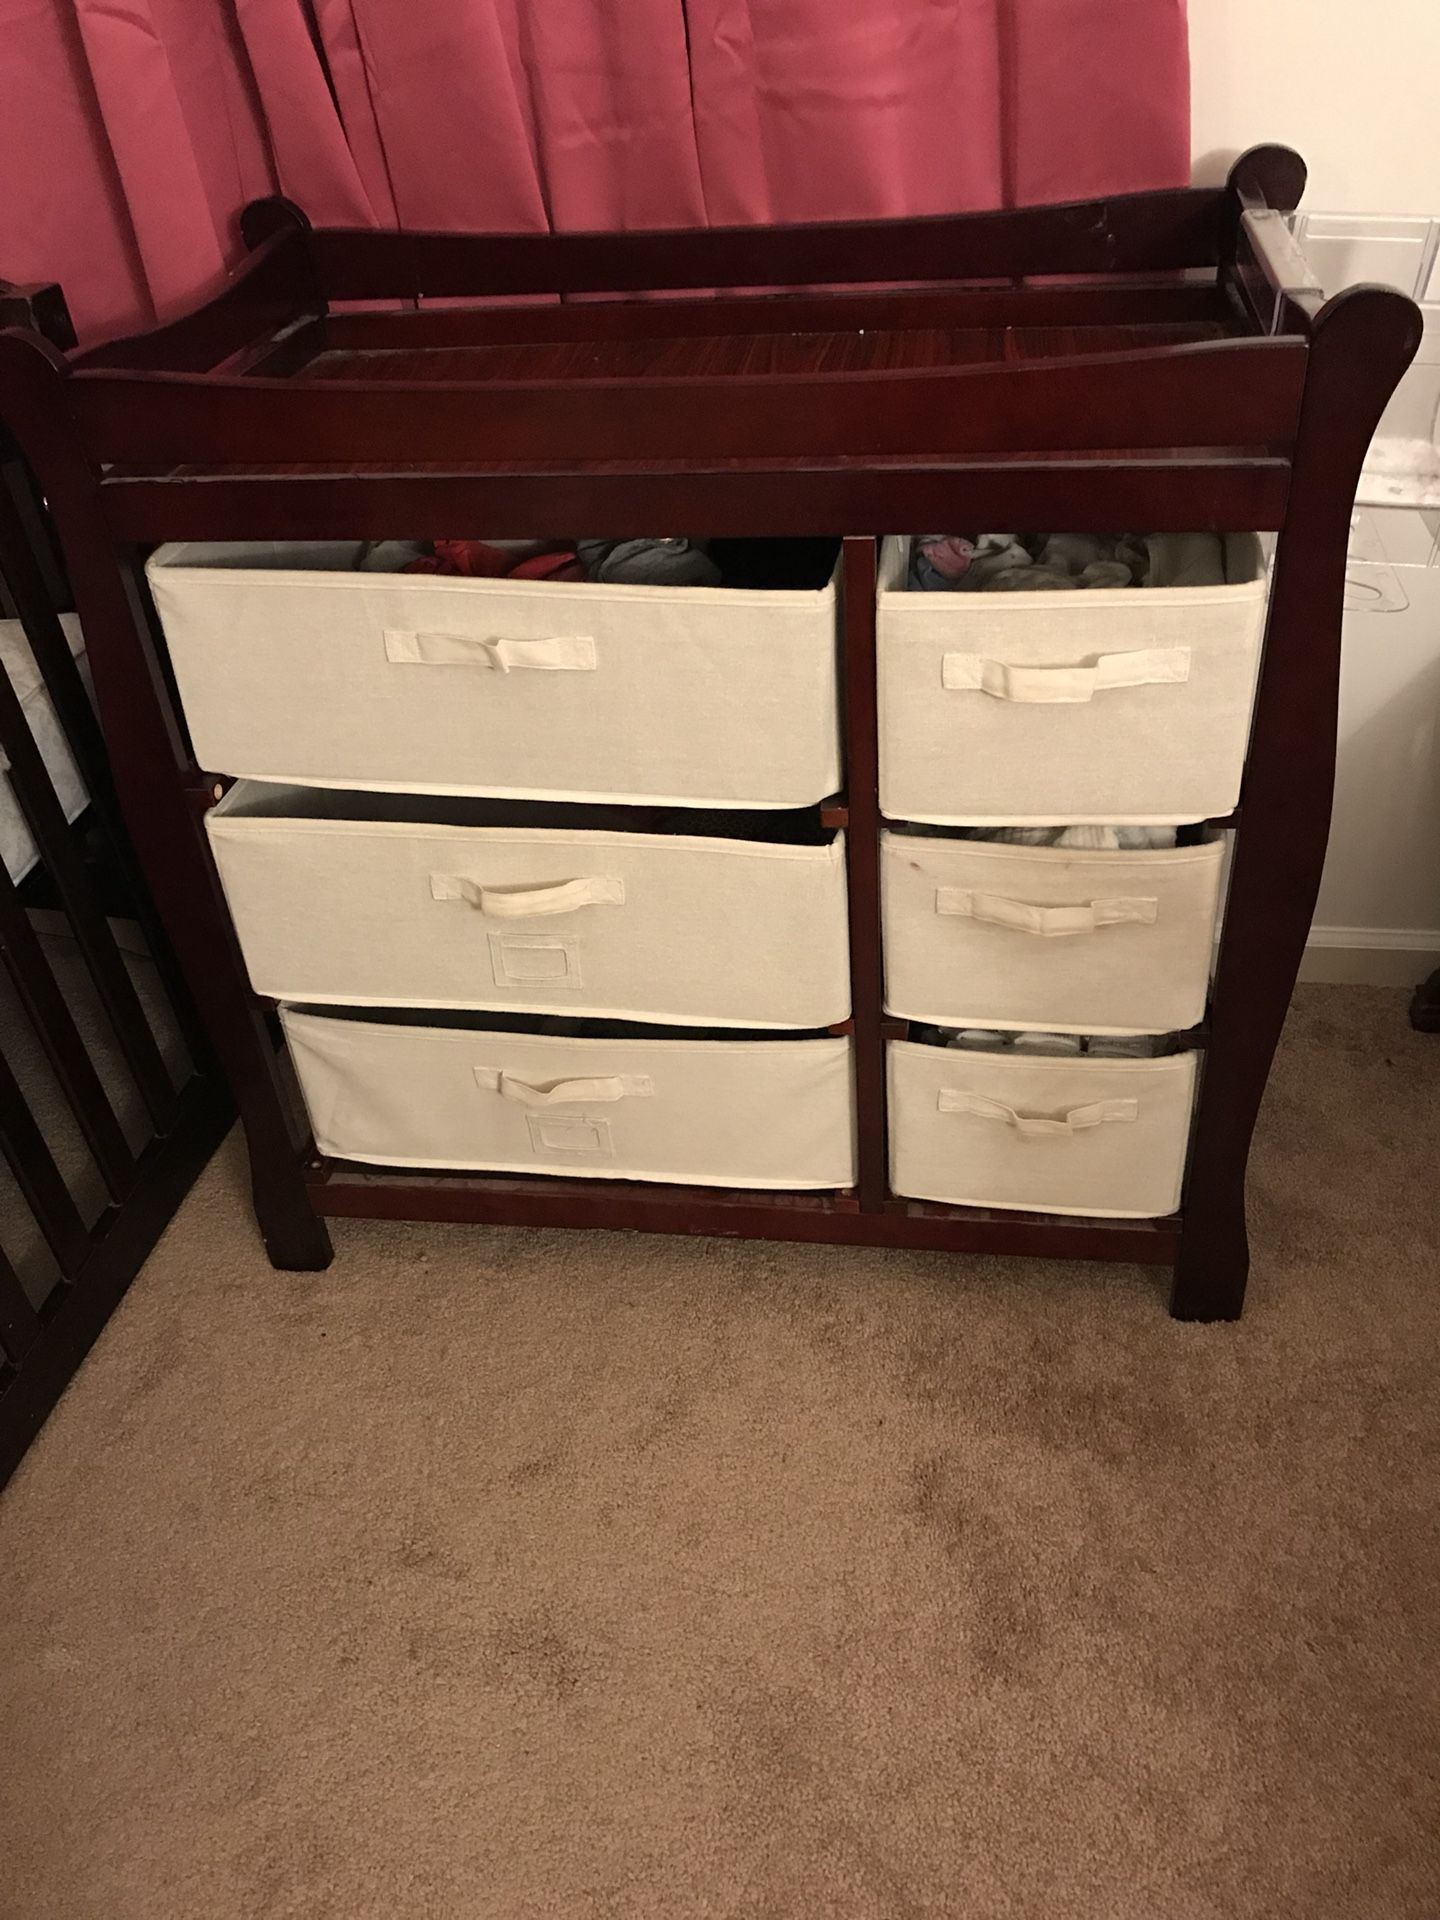 Changing table / dresser with diapers dispenser